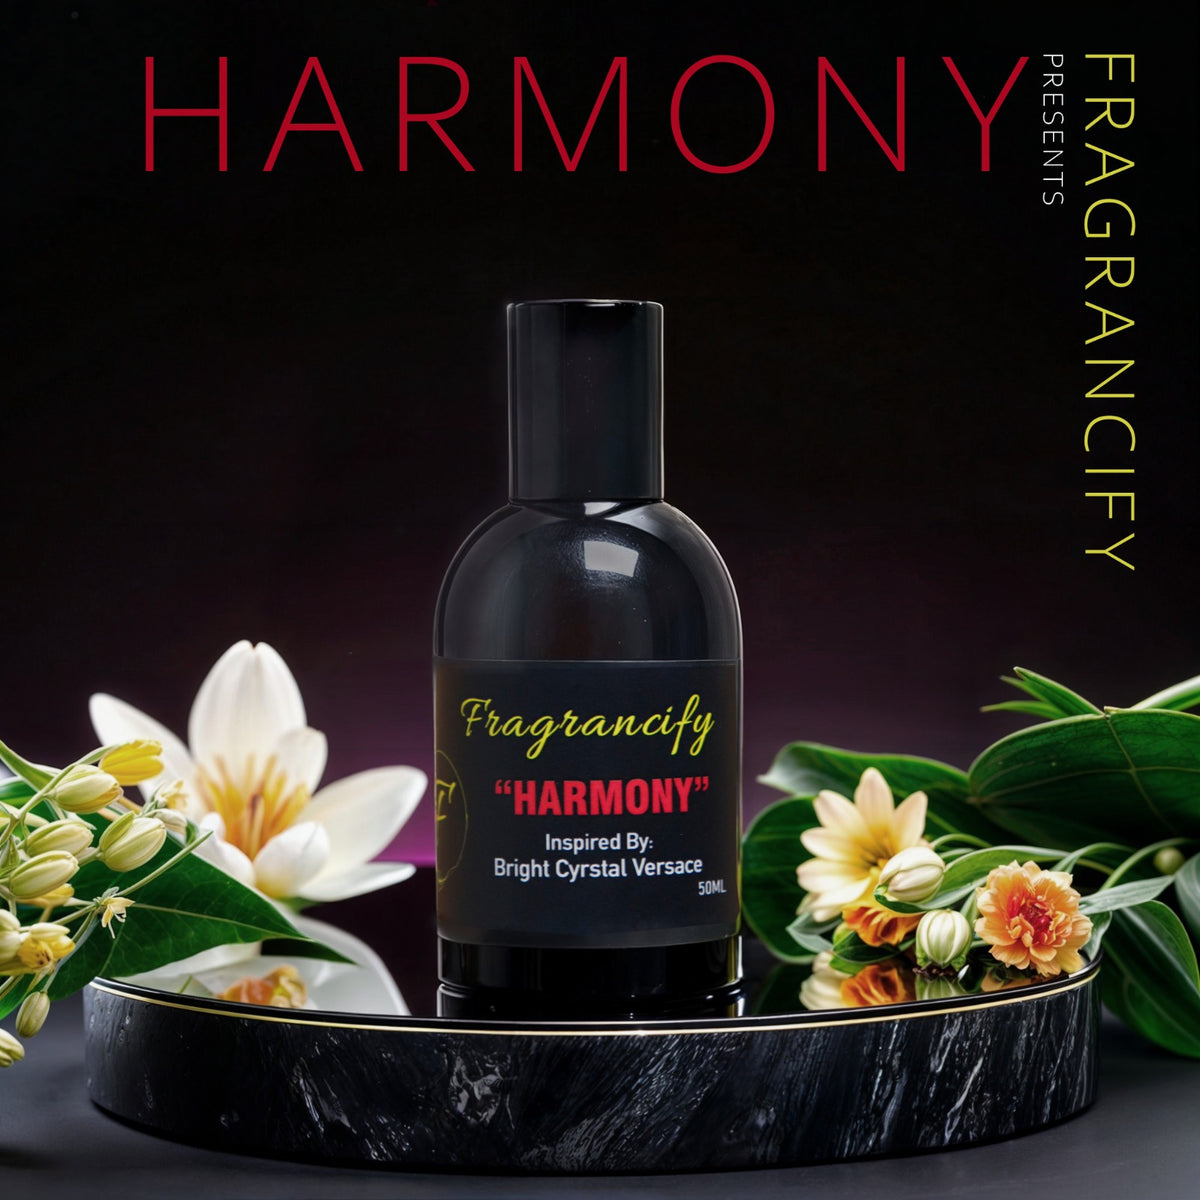 HARMONY-INSPIRED BY BRIGHT CRYSTAL VERSACE